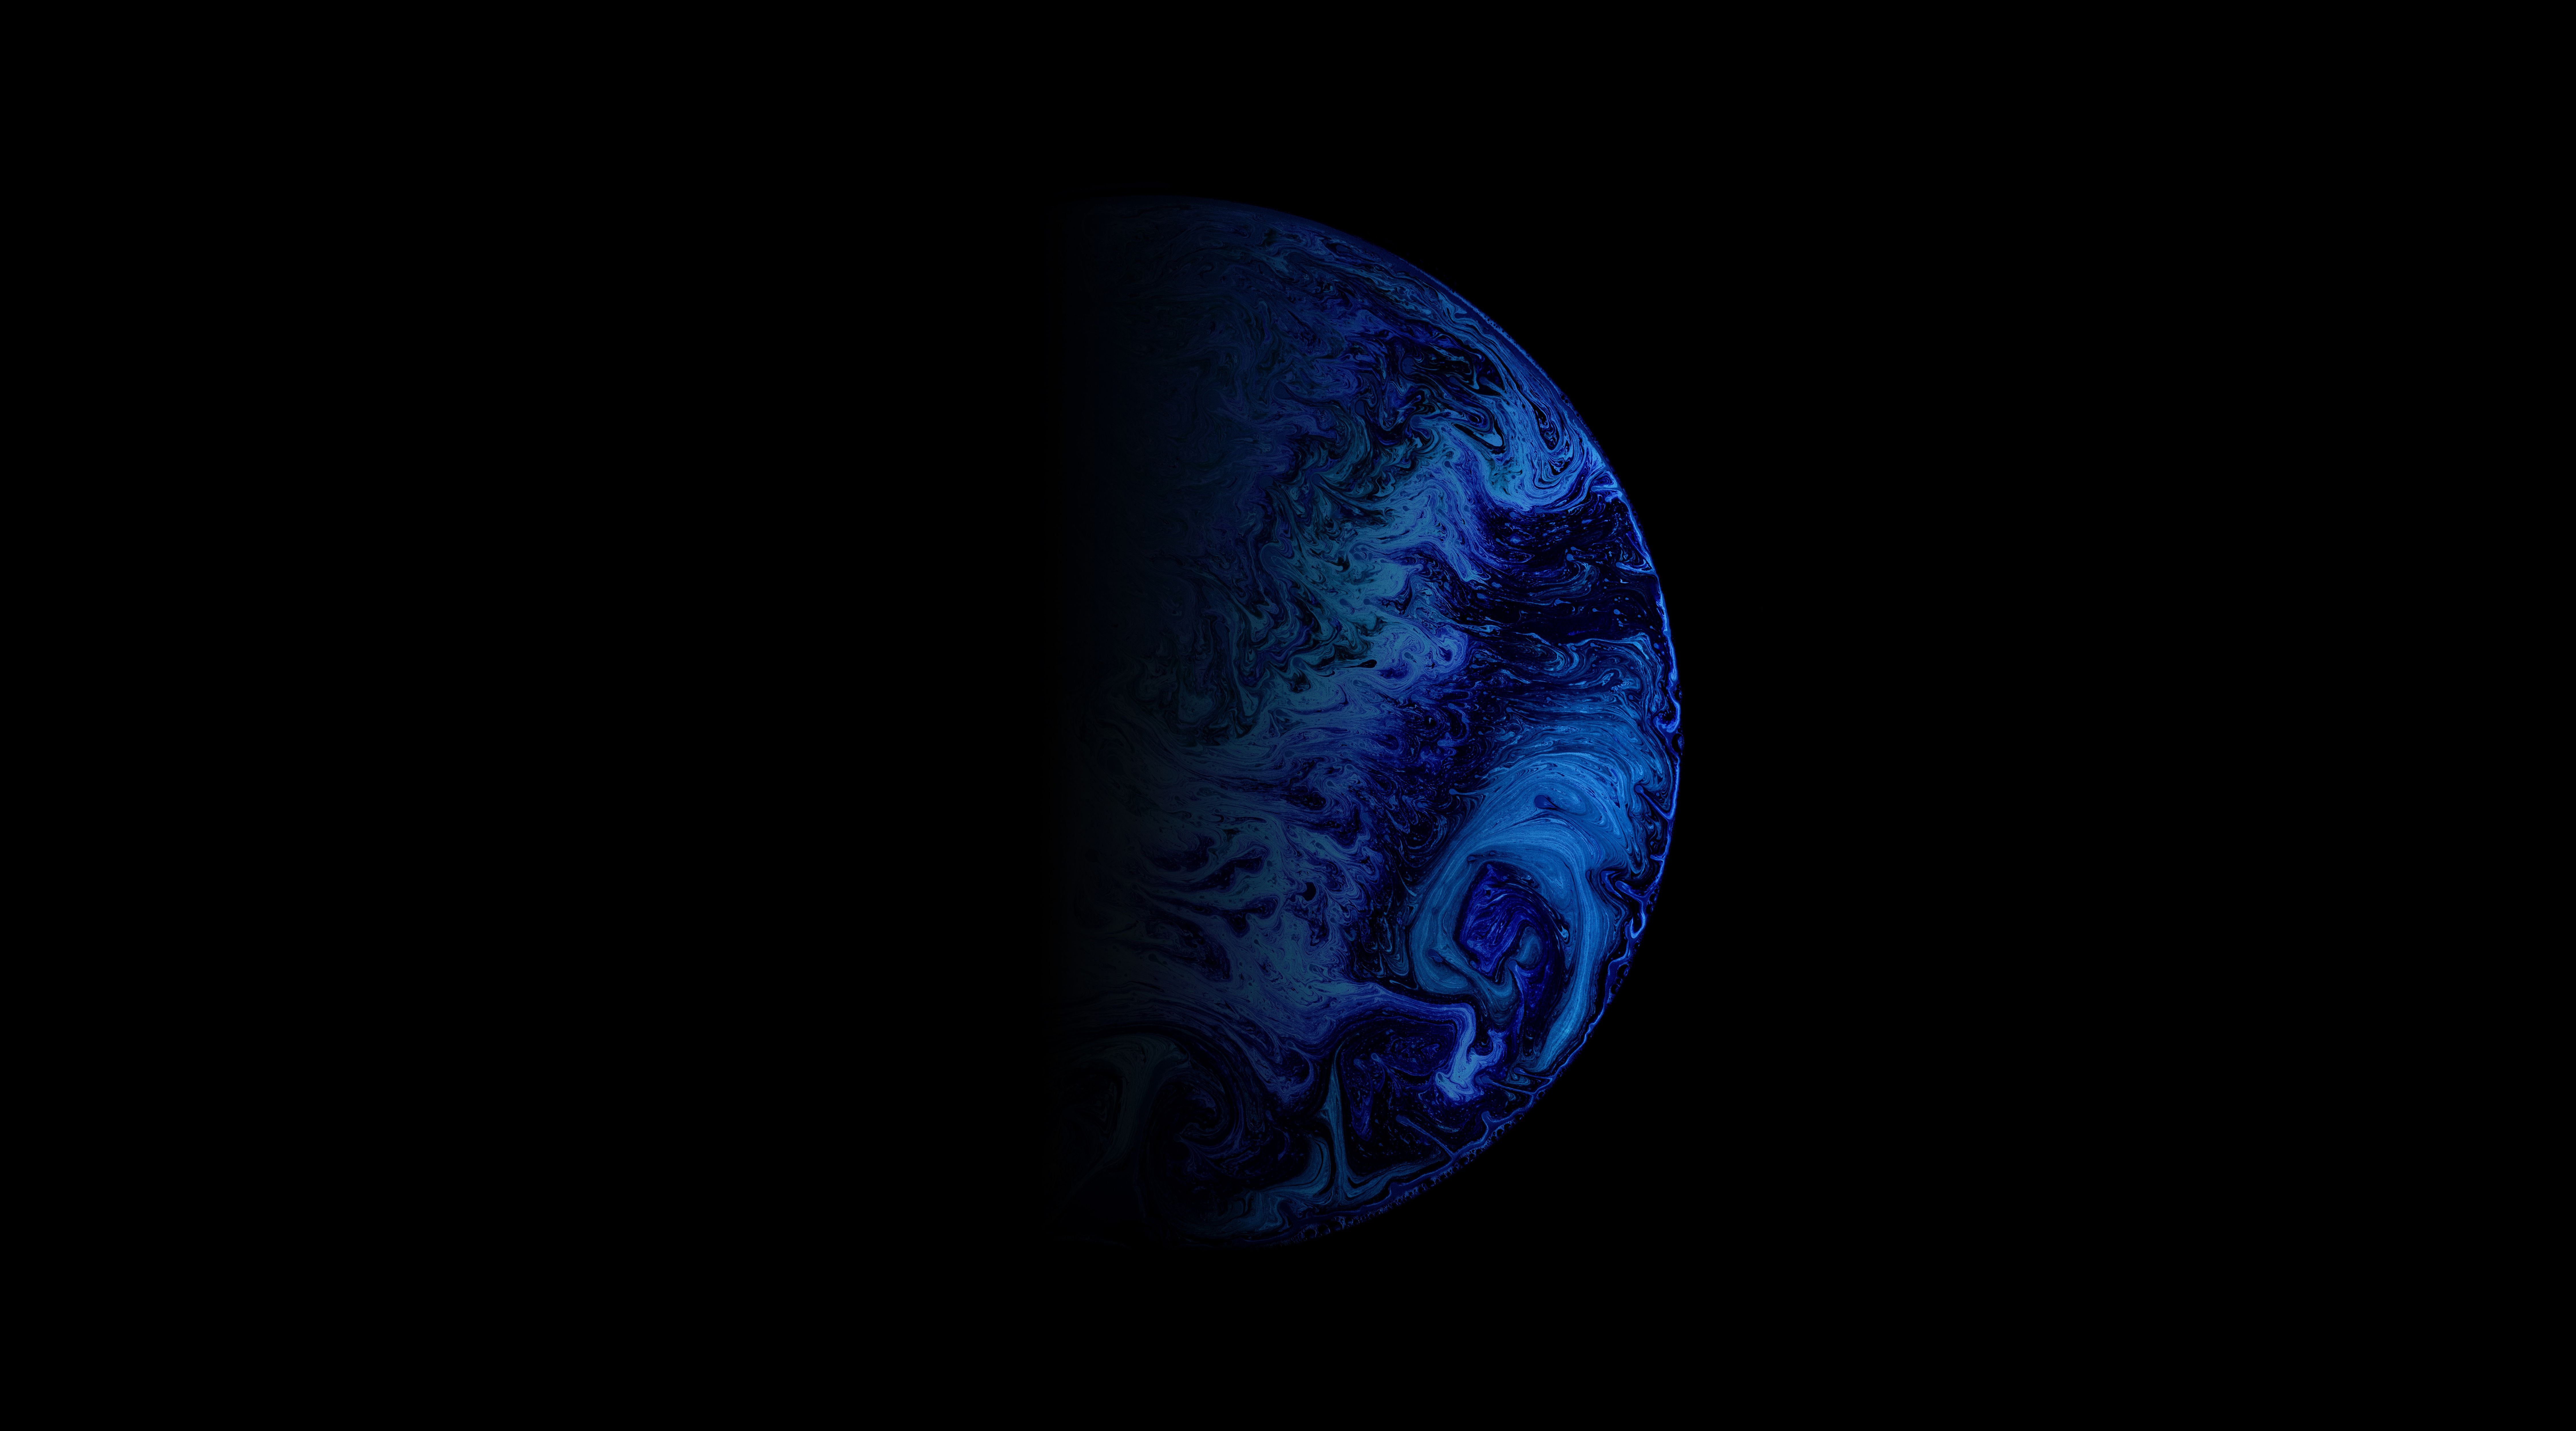 A black and blue planet in the dark - Planet